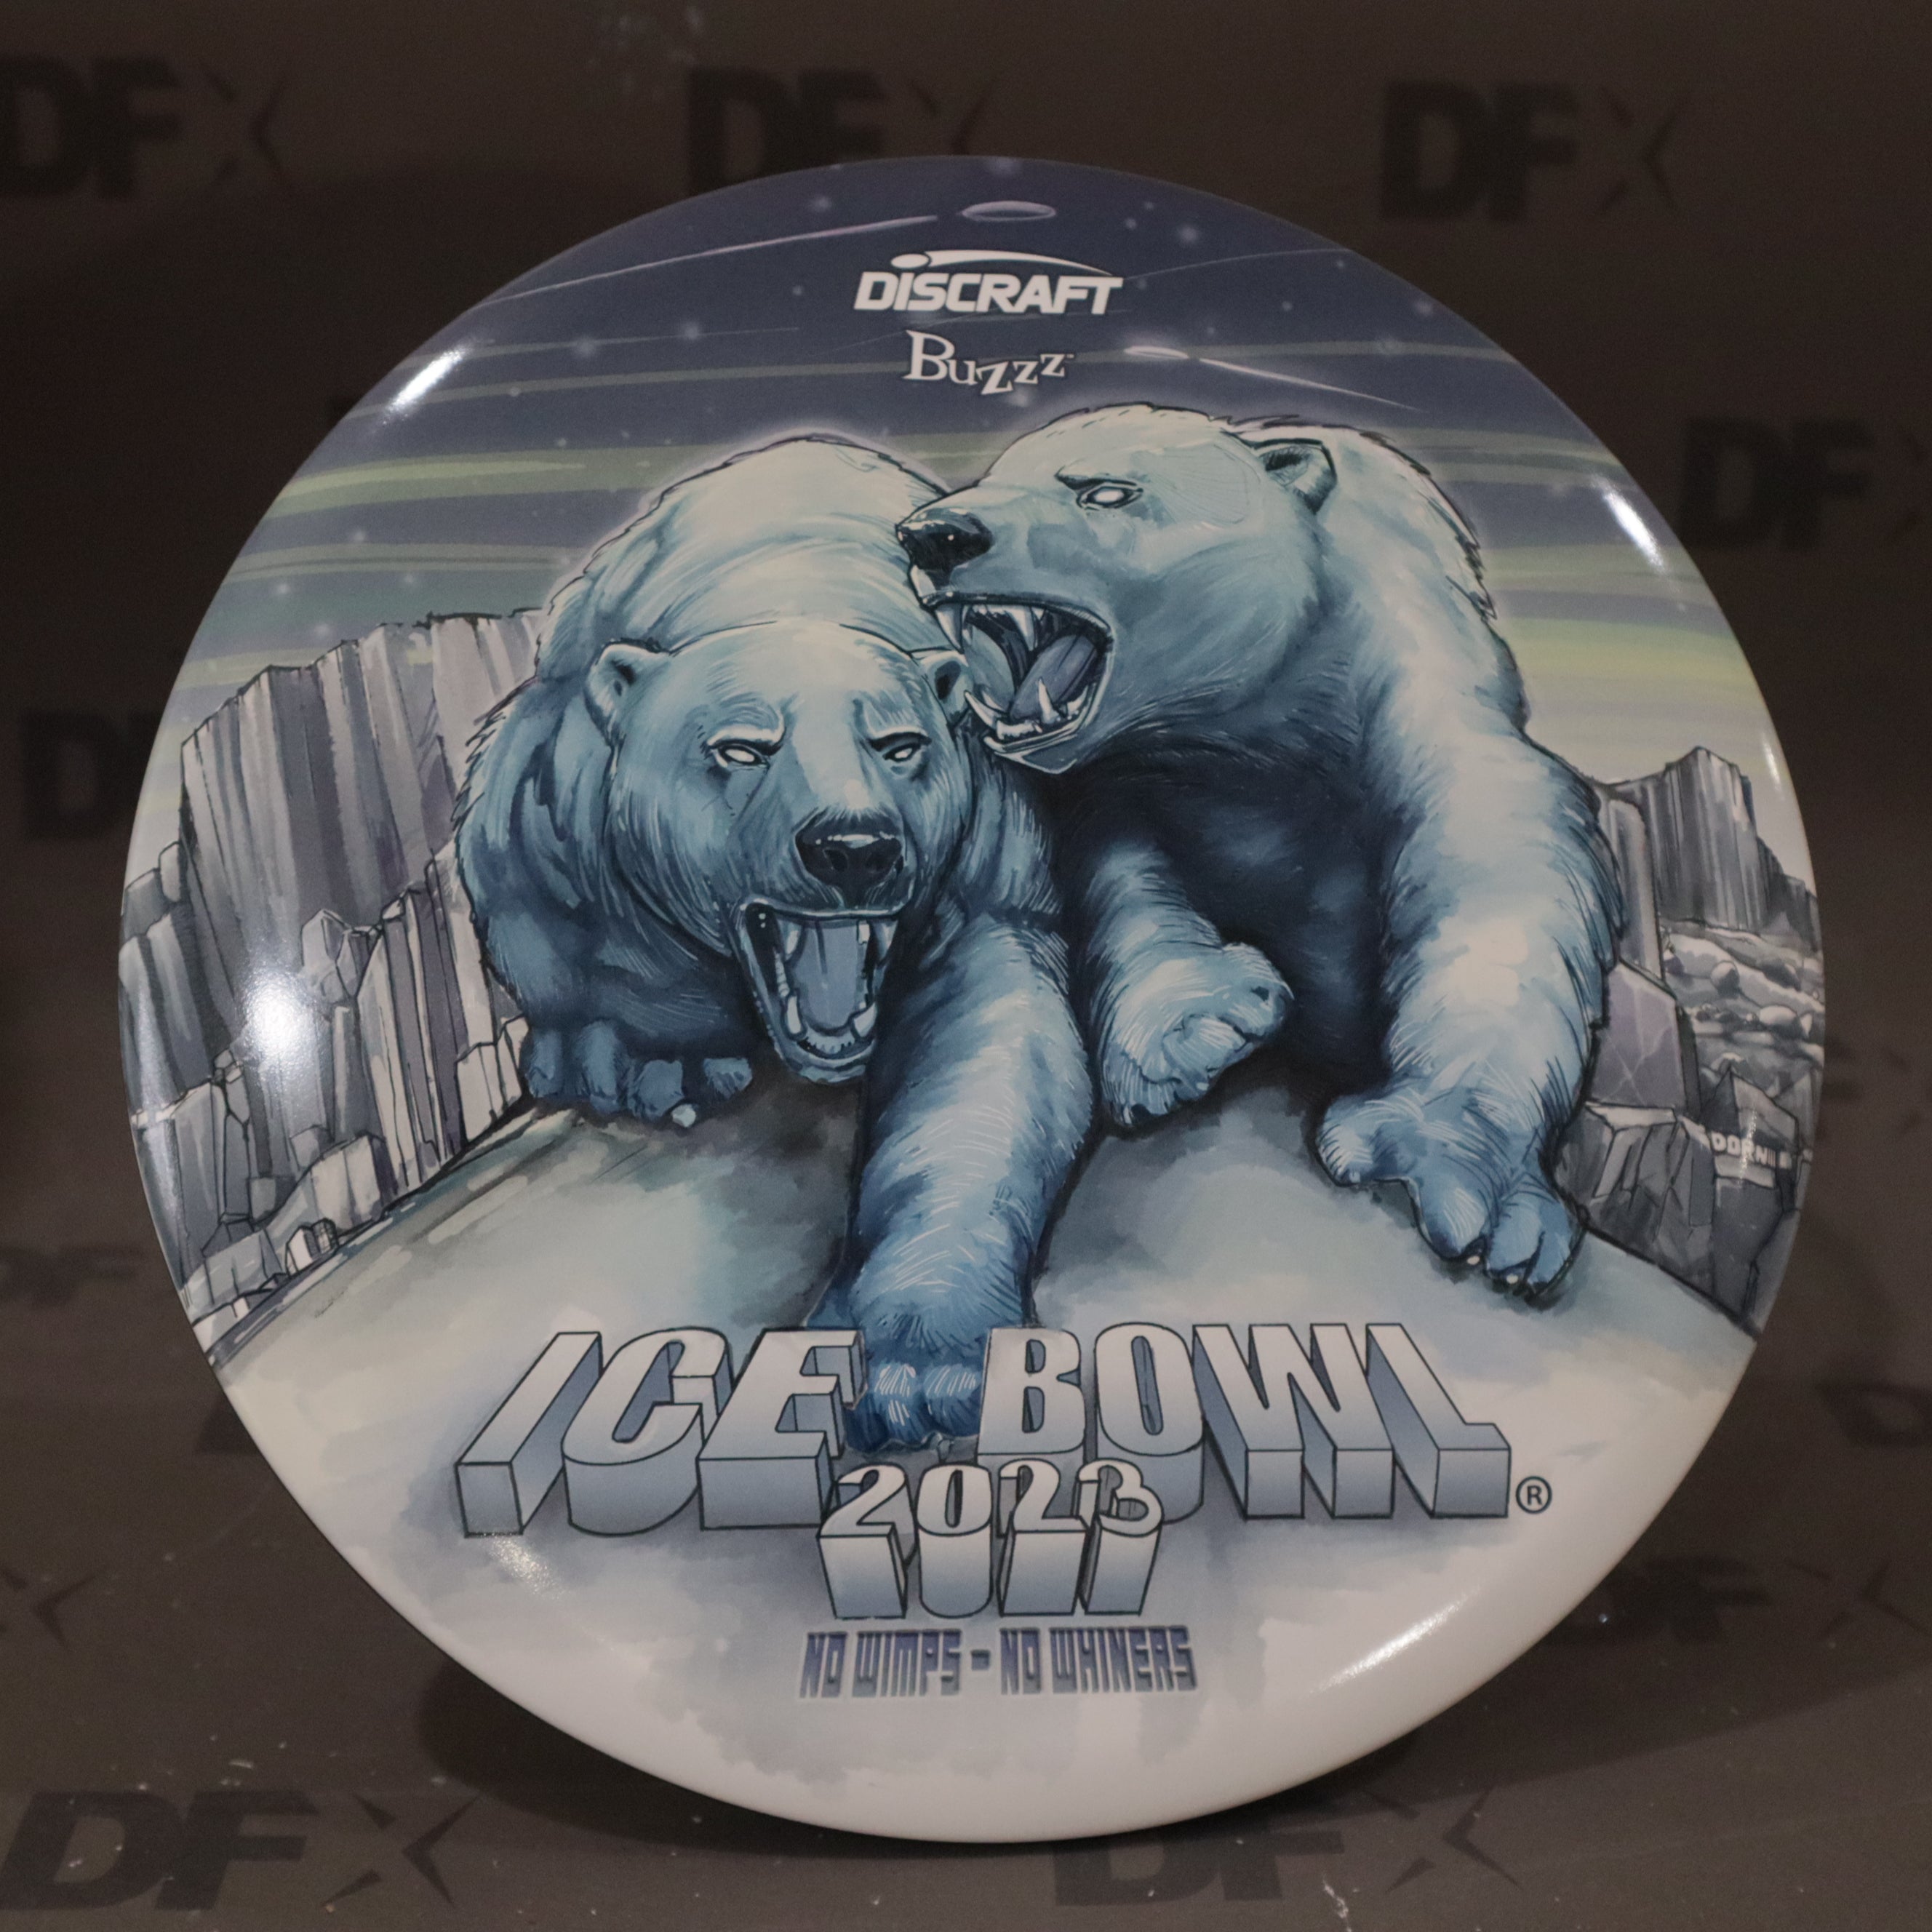 Discraft Full Color Buzzz - Ice Bowl 2023